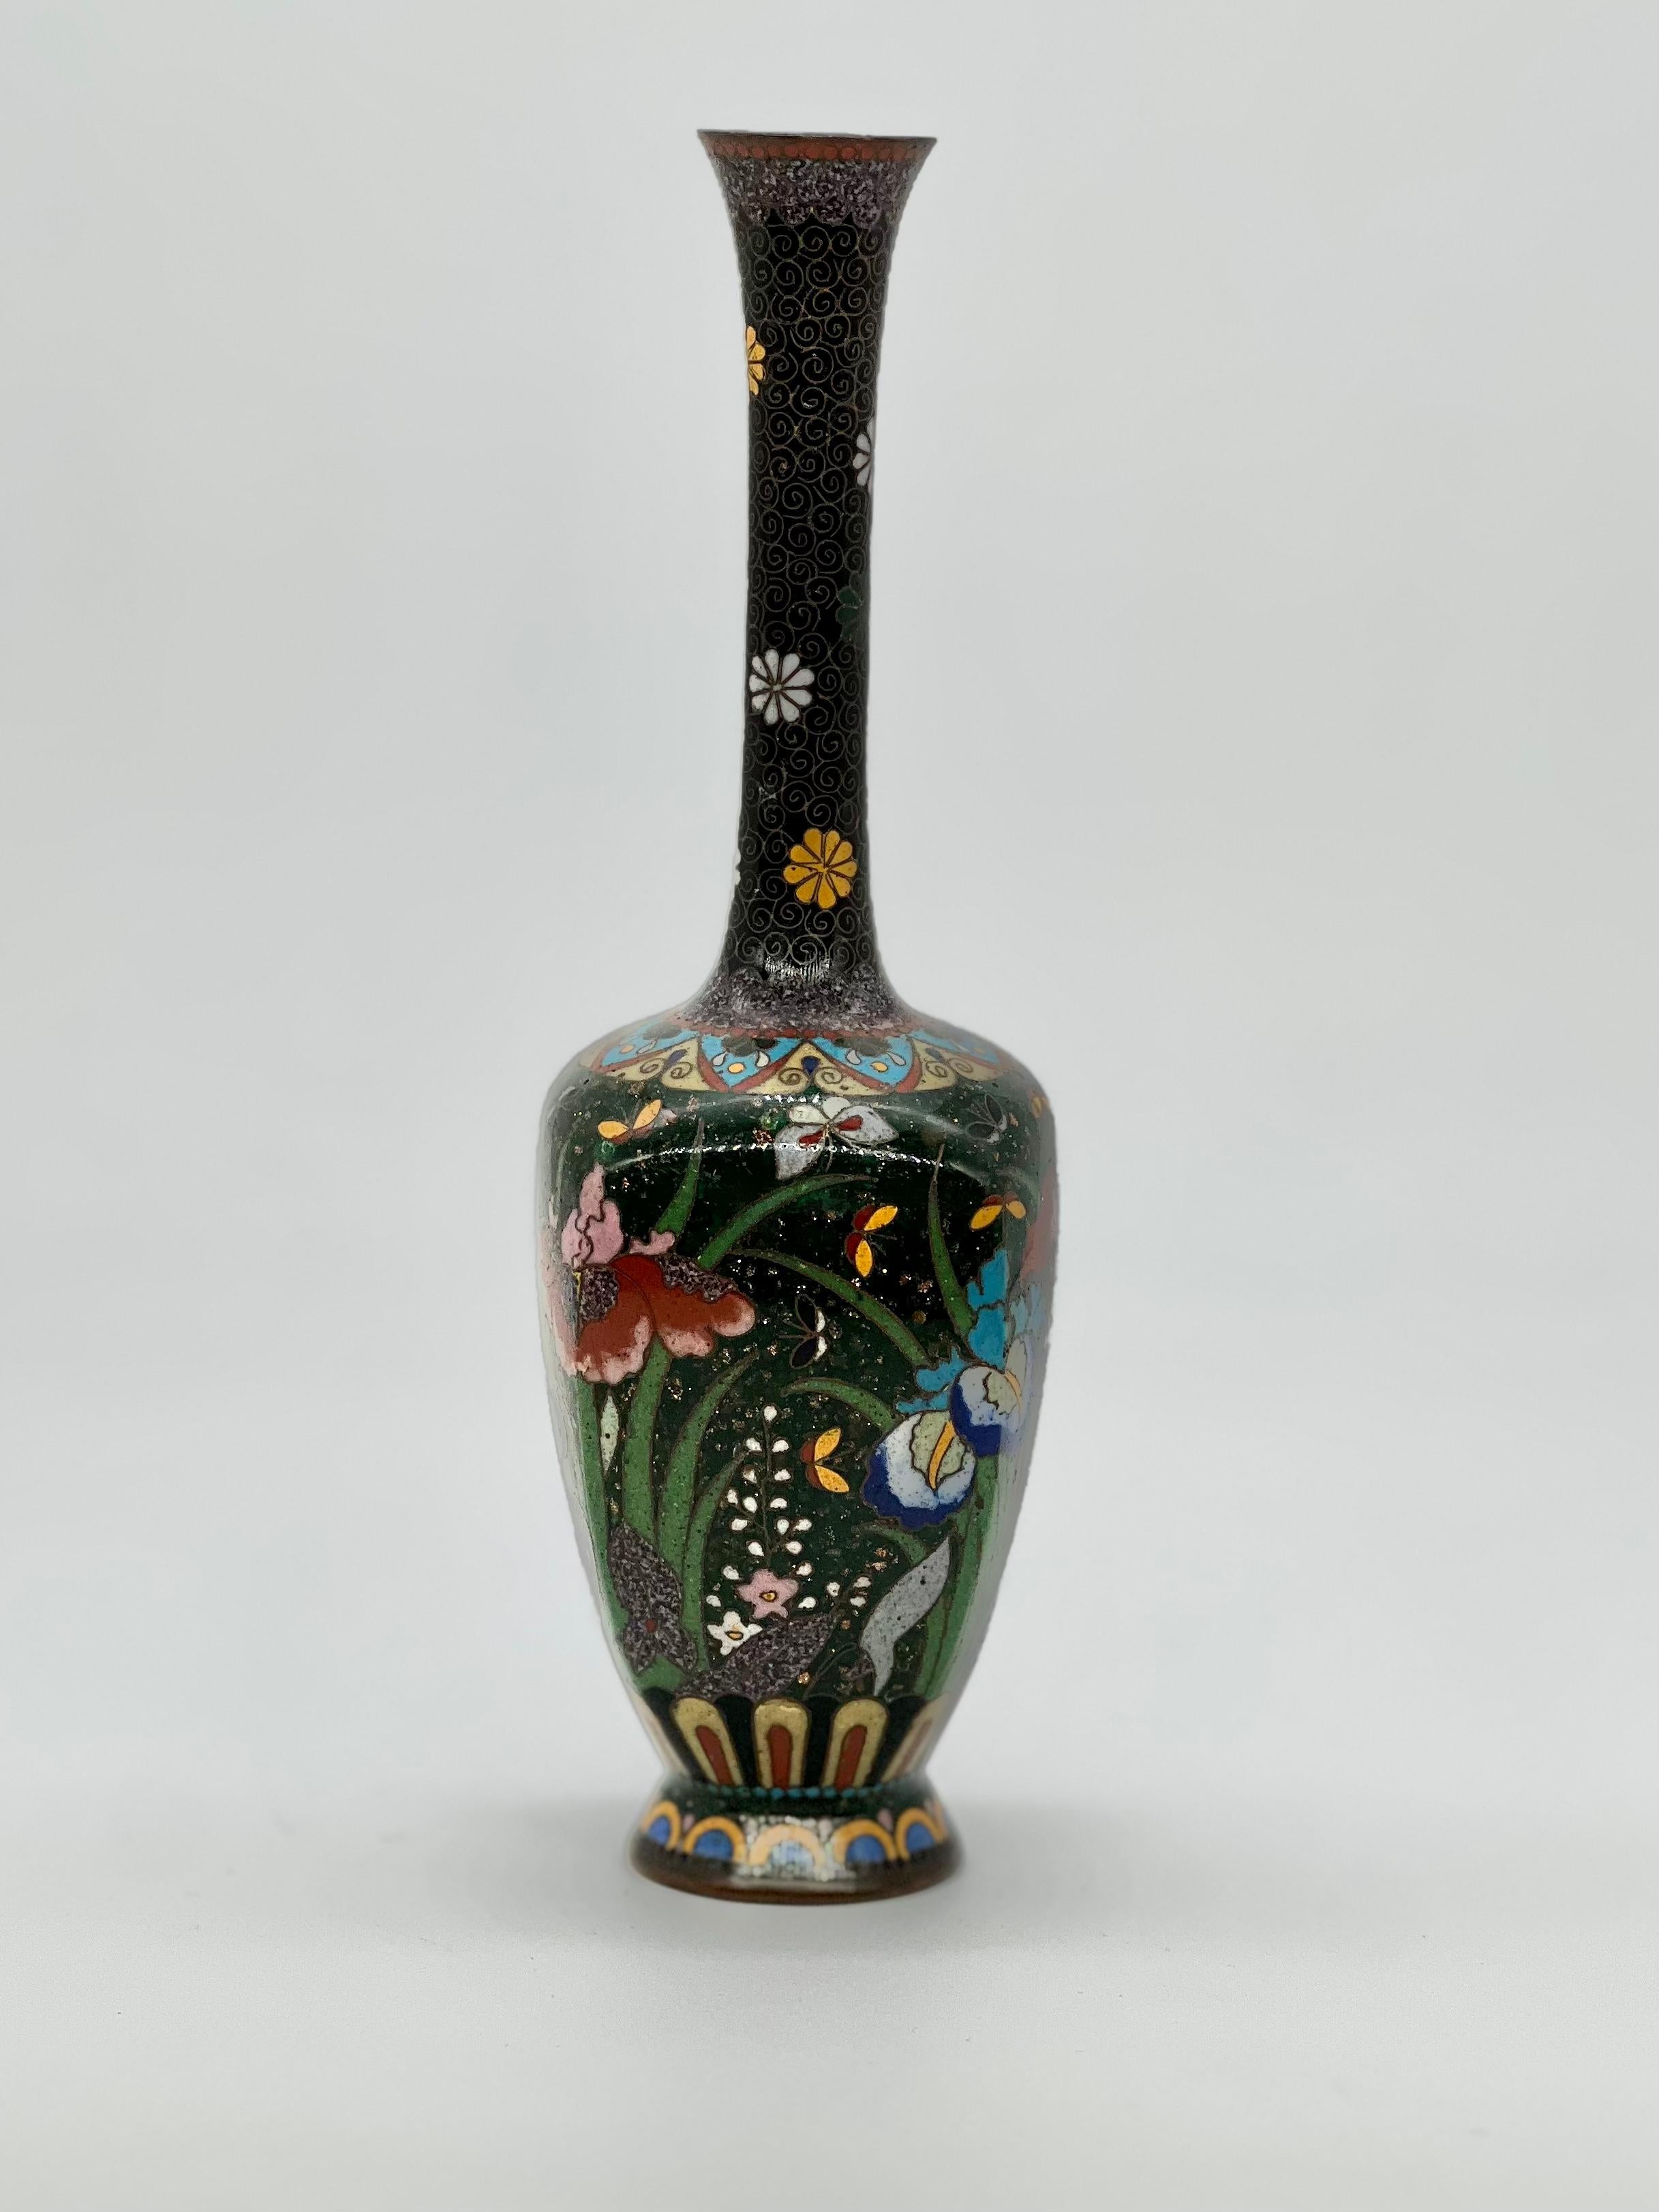 Fine Japanese Kyoto Shippo Cloisonne Enamel Vase, 19th C  In Good Condition For Sale In London, GB